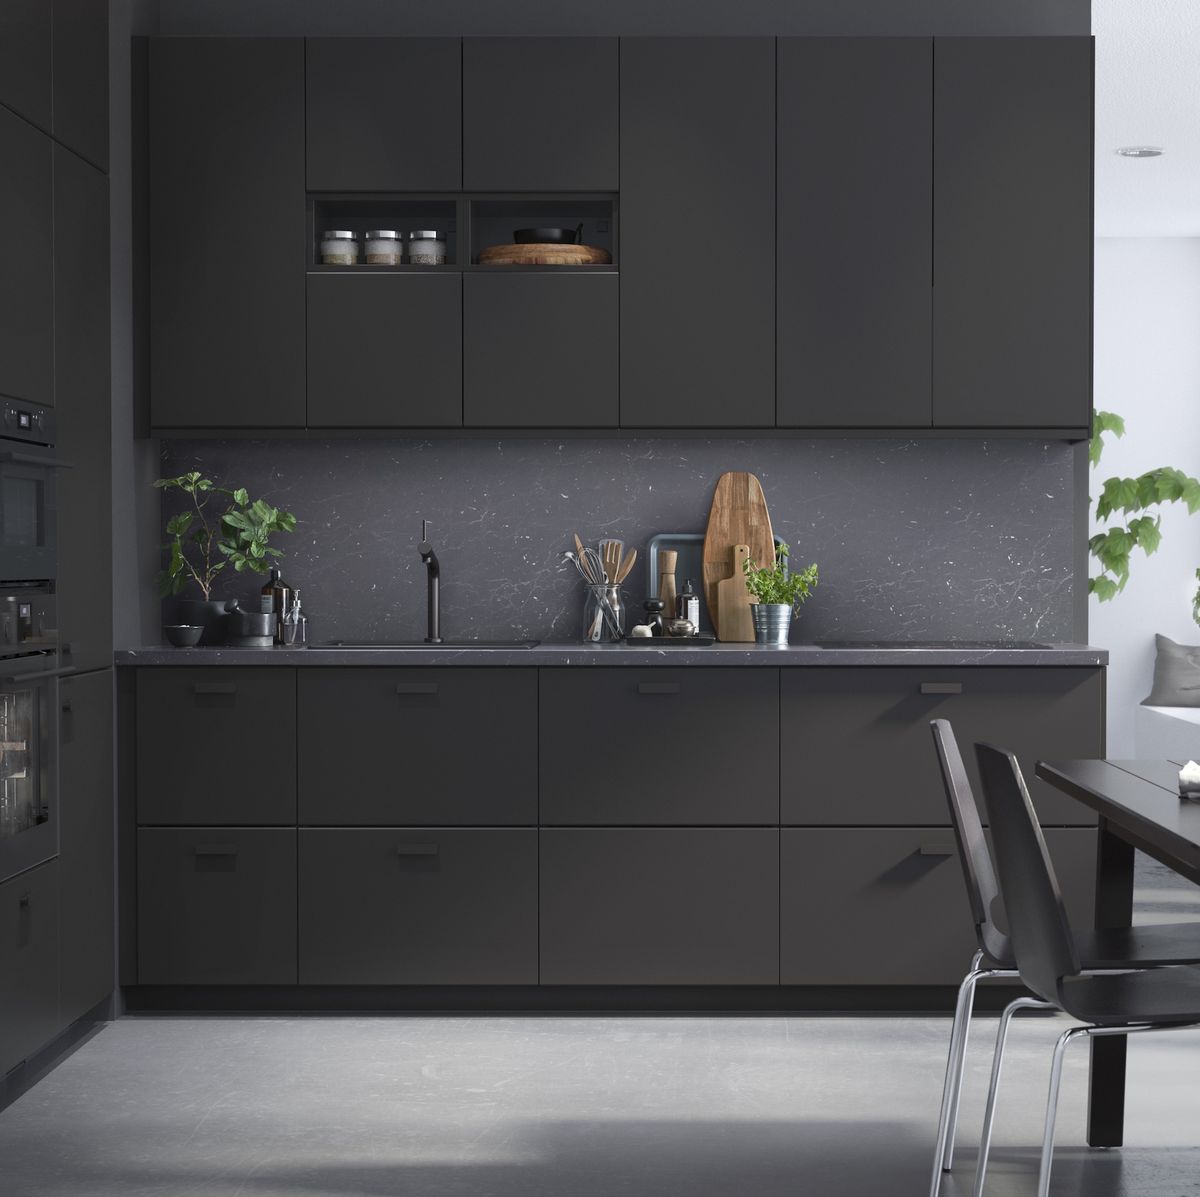 IKEA Kitchen Cabinets Made From Recycled Materials - Black IKEA Cabinets